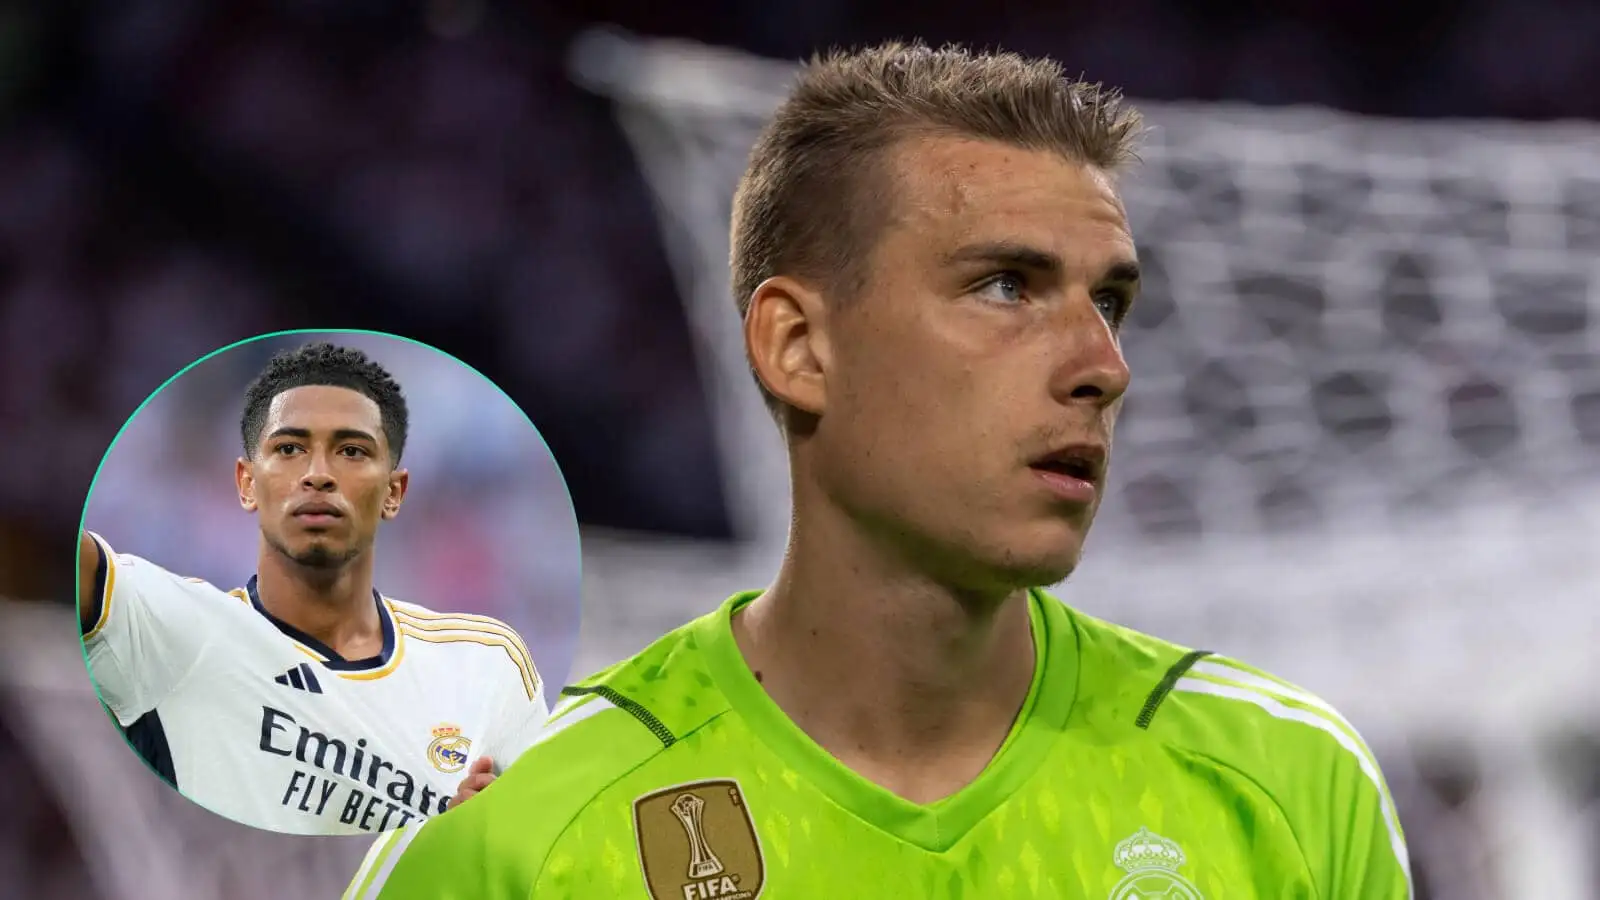 Real Madrid players Andriy Lunin and Jude Bellingham